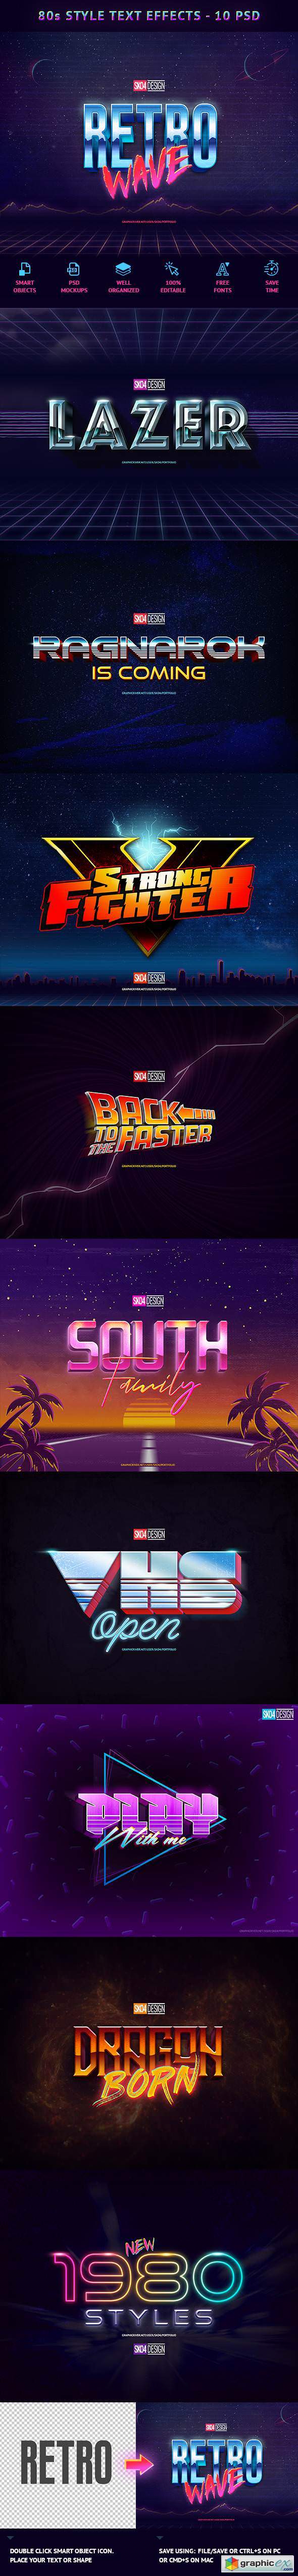 80s Text Effects - 10 PSD